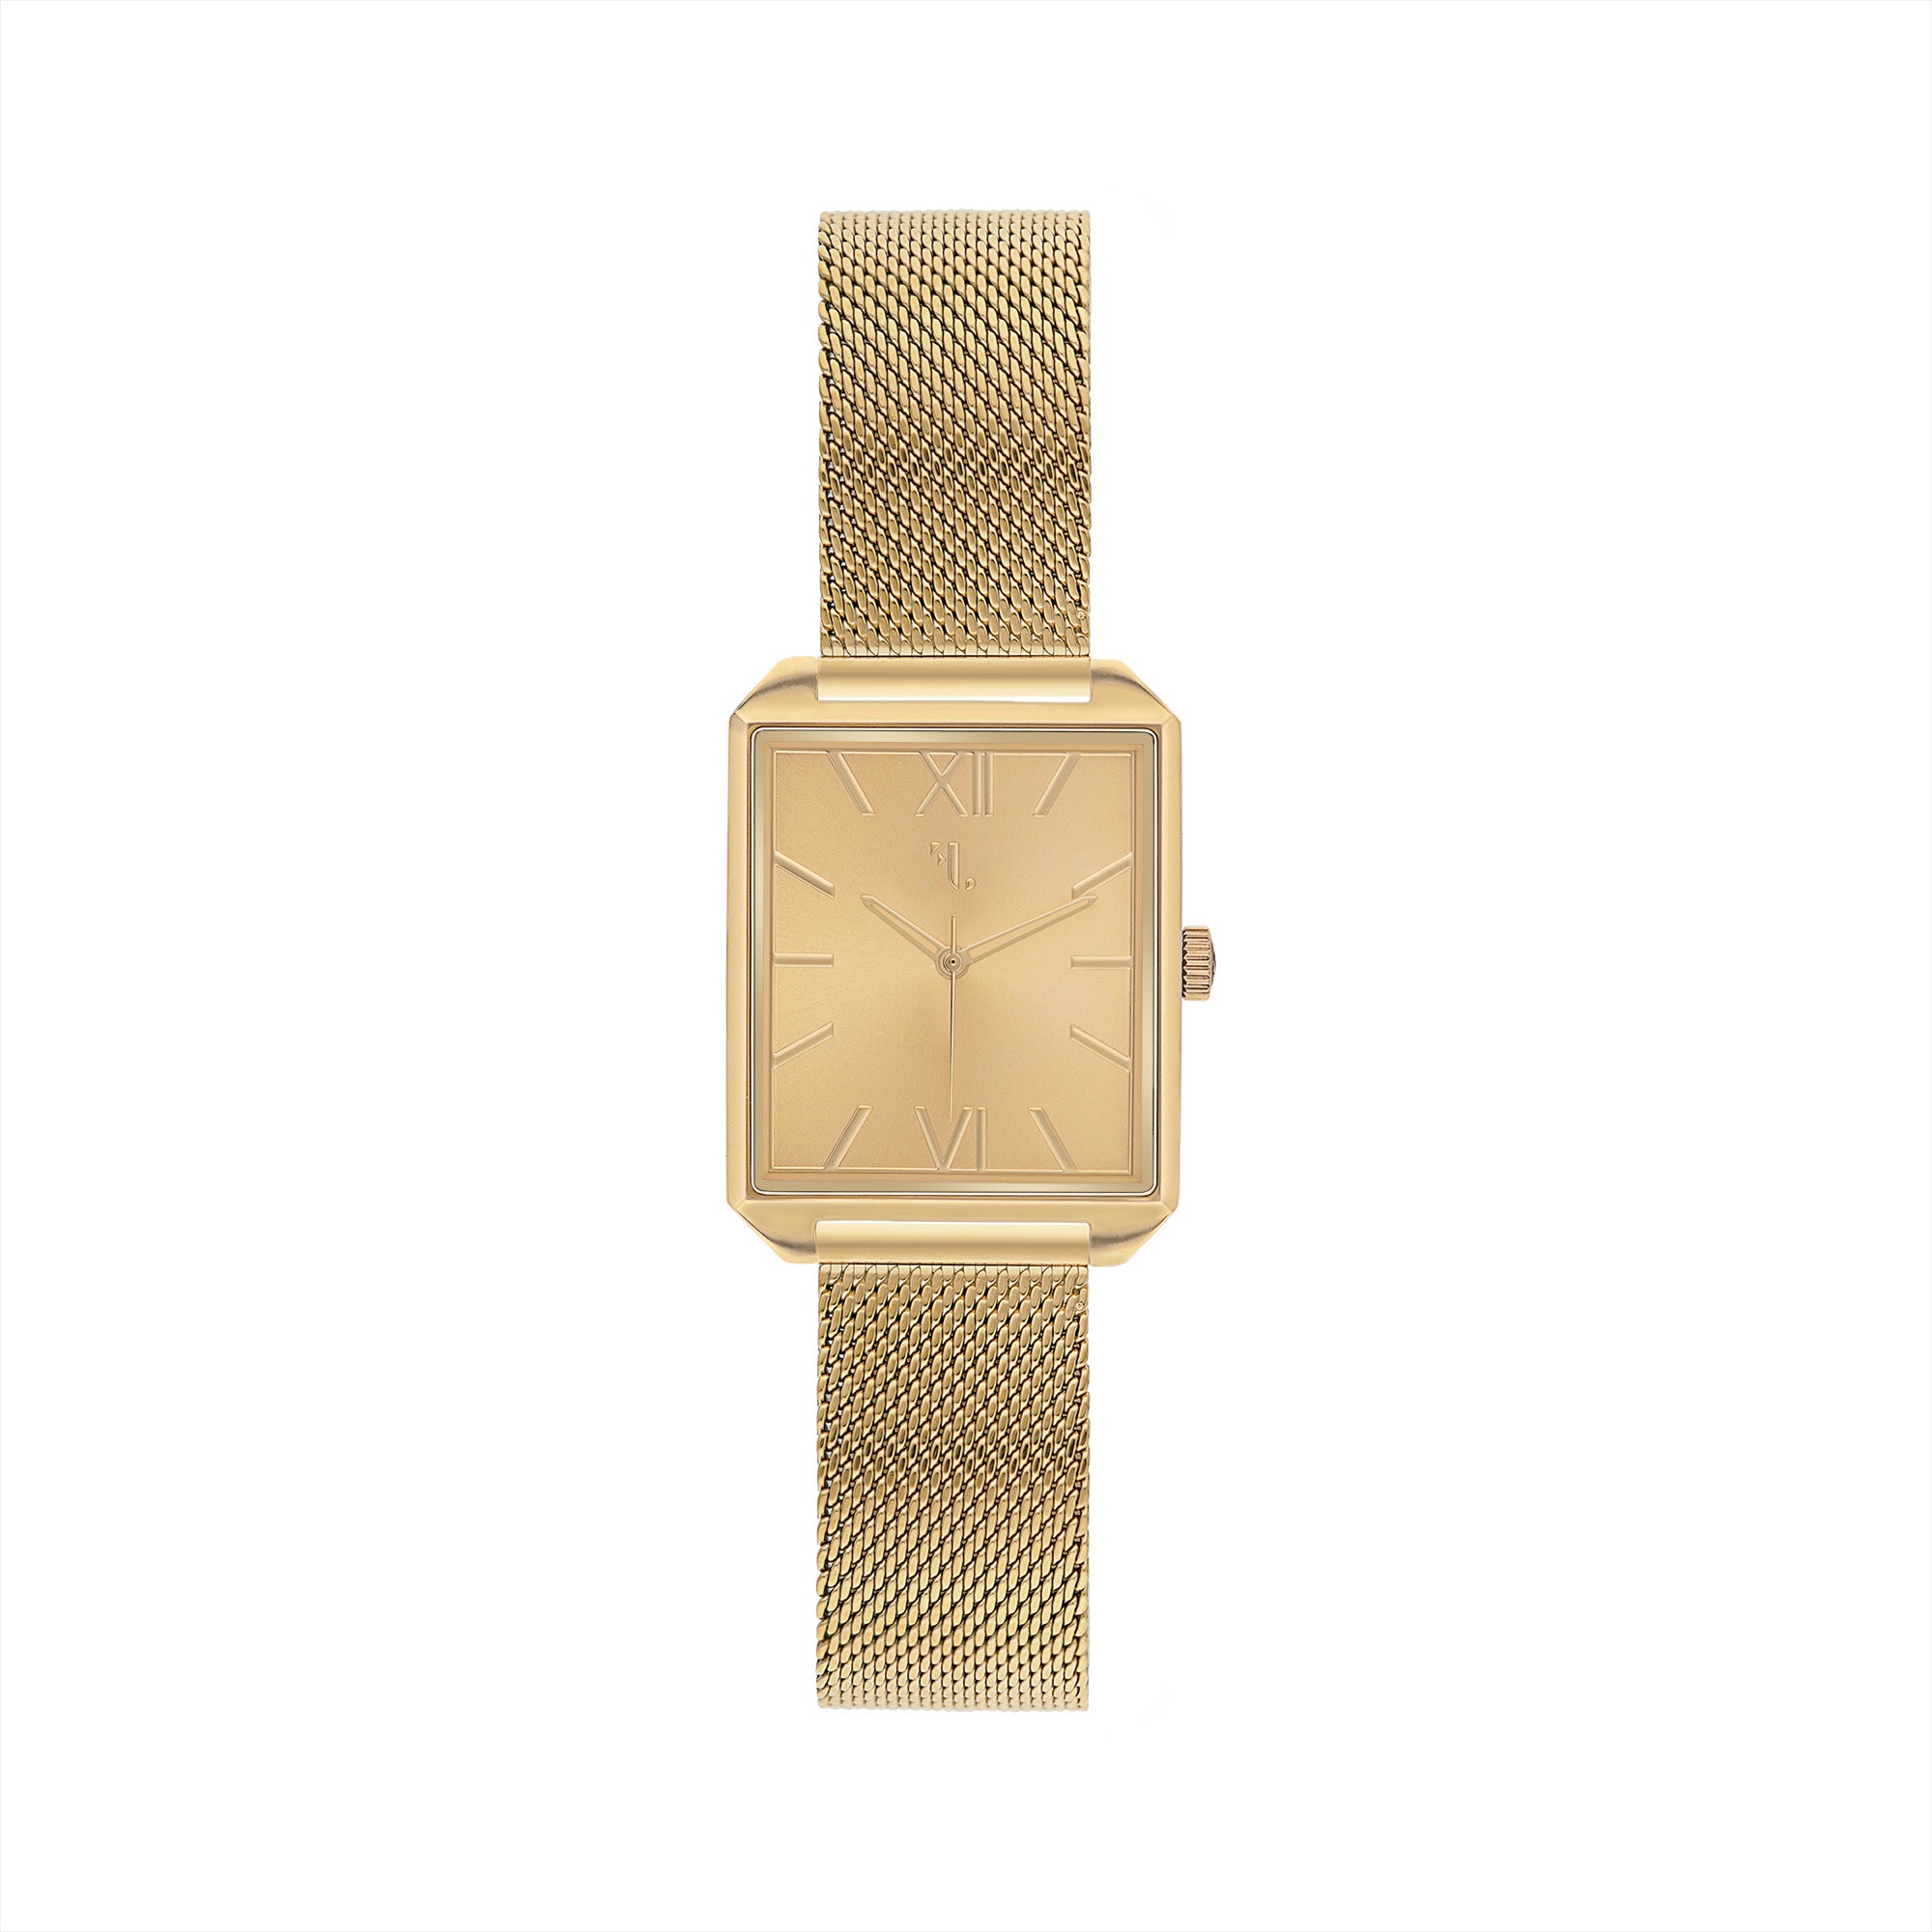 Men's monochrome gold watch with a modern square design and a sleek minimalist dial. This watch is designed in Montreal by Five Jwlry, it is equipped with a quartz mechanism, a 14k gold mesh band and it has a water resistance of 5ATM!